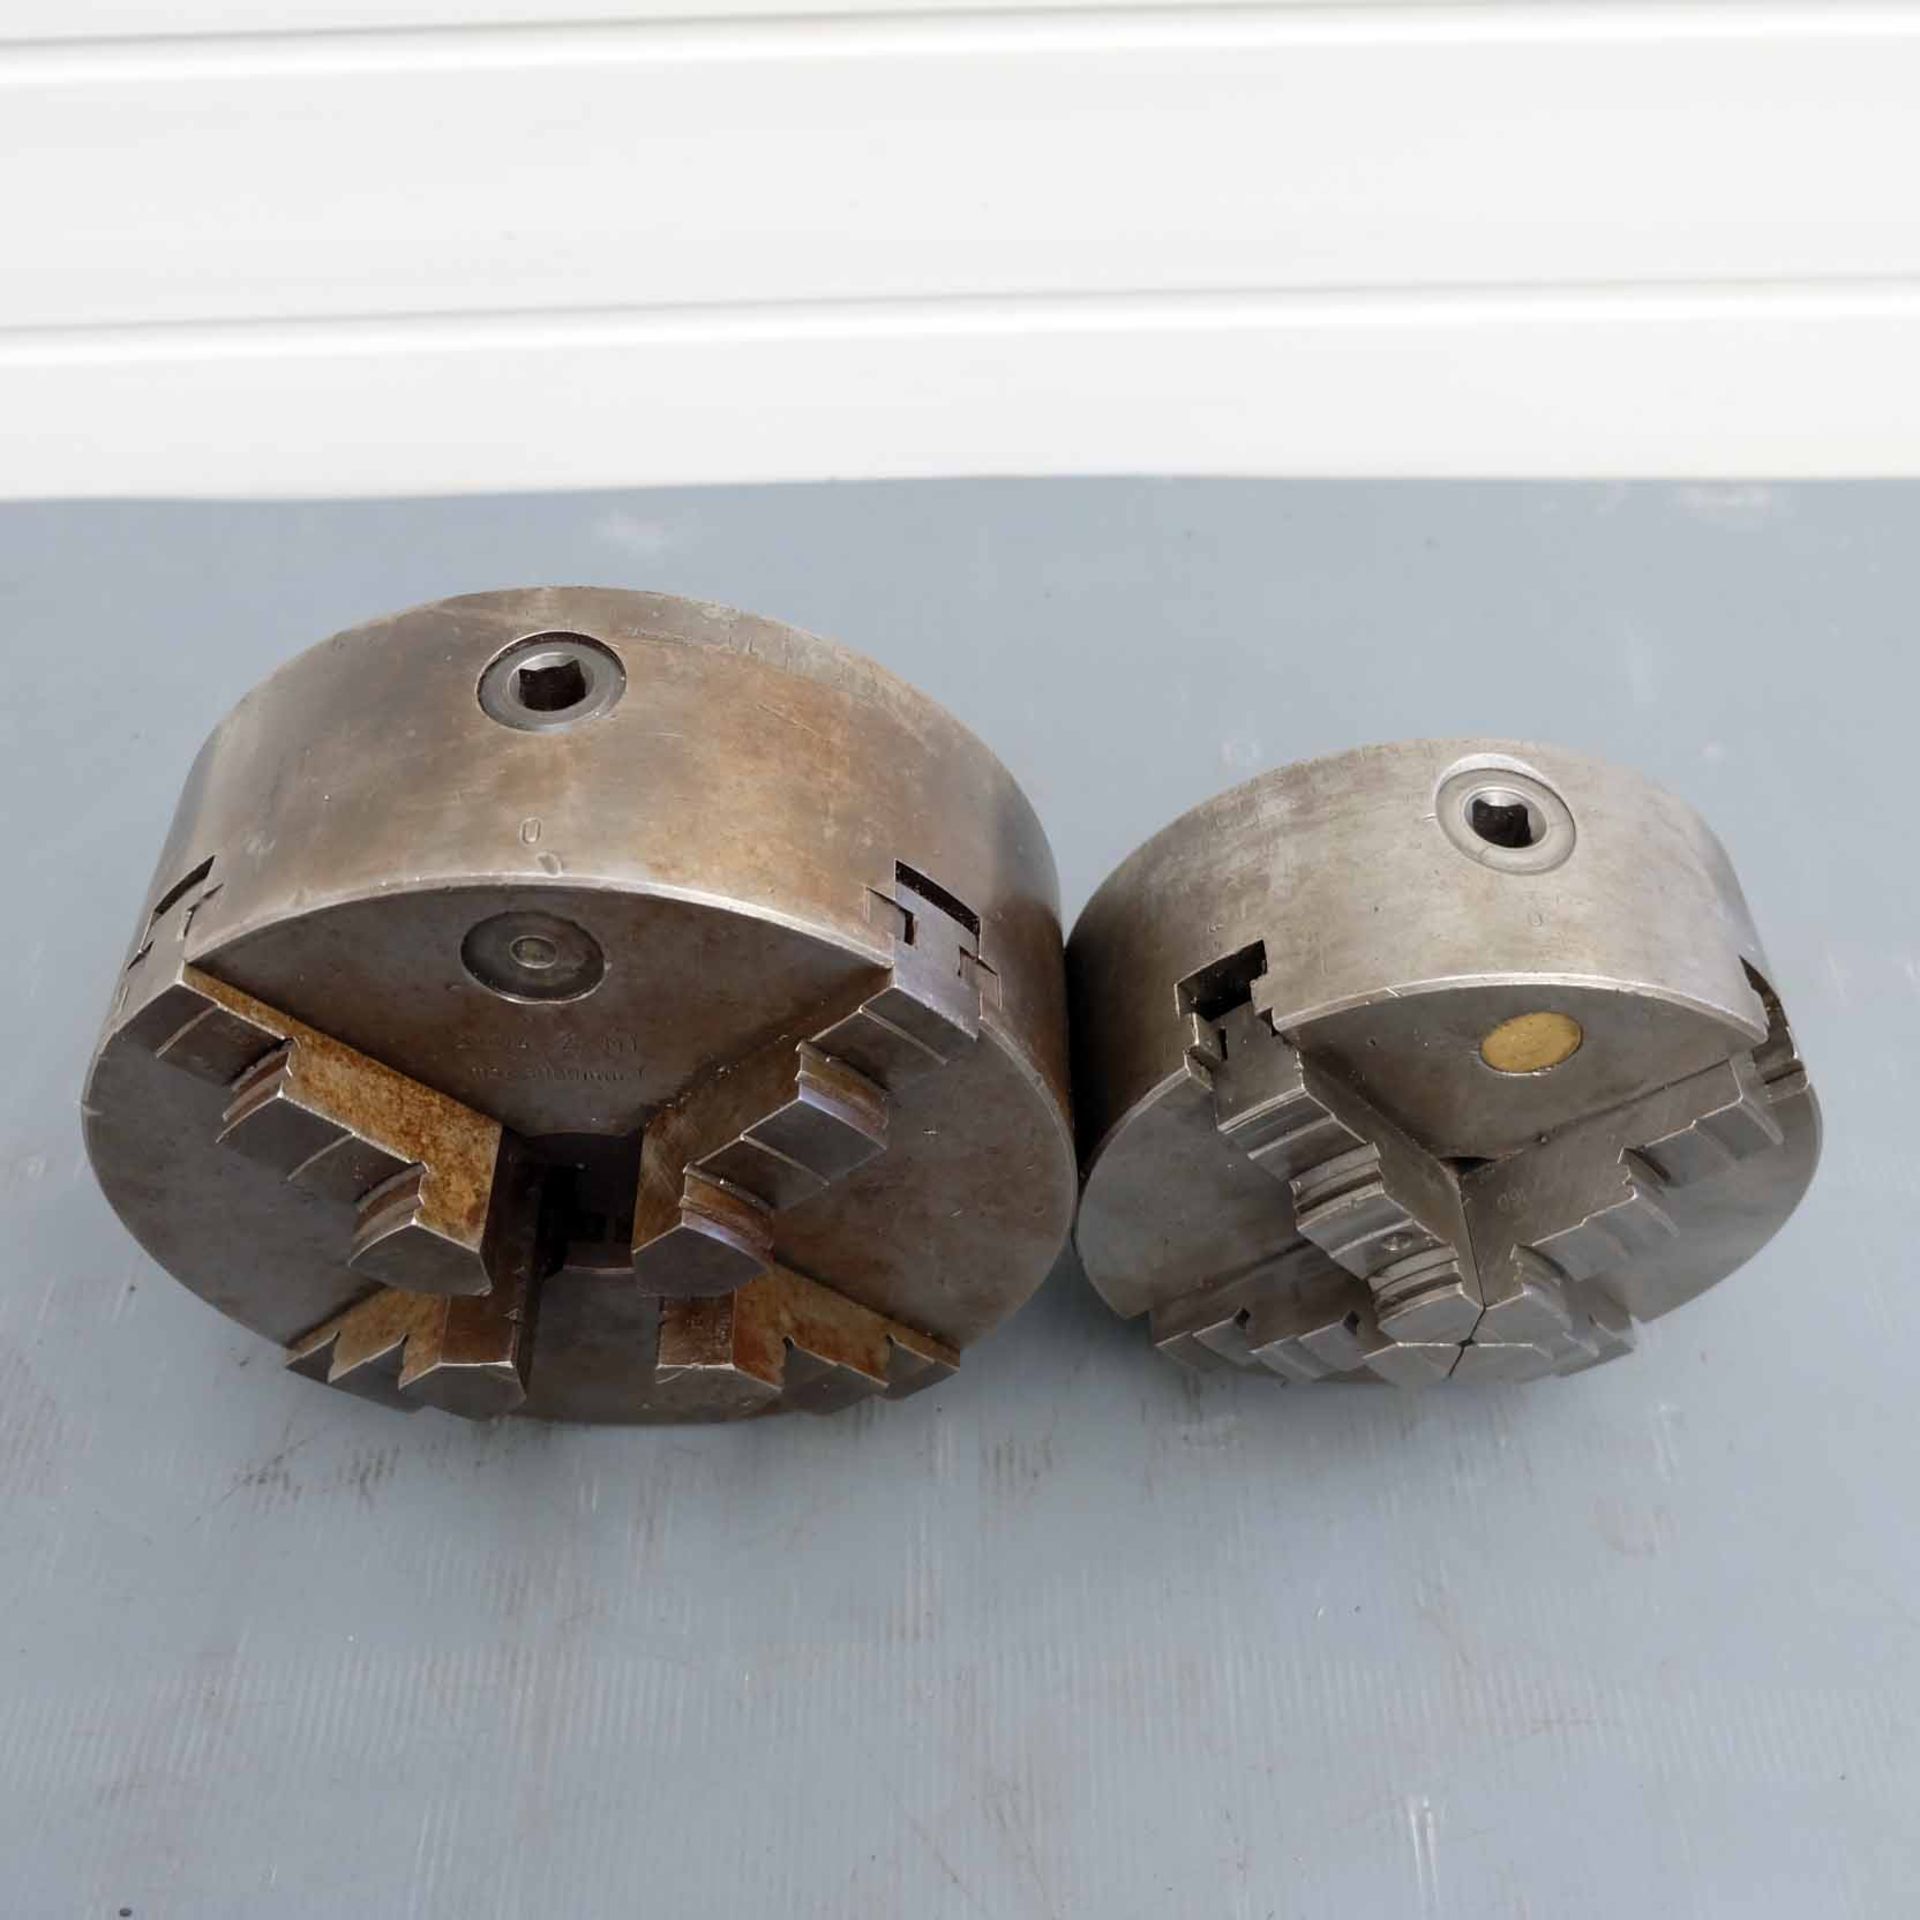 Two Self Centring 4 Jaw Scroll Chucks. Sizes 200mm & 160mm Diameter. - Image 2 of 7